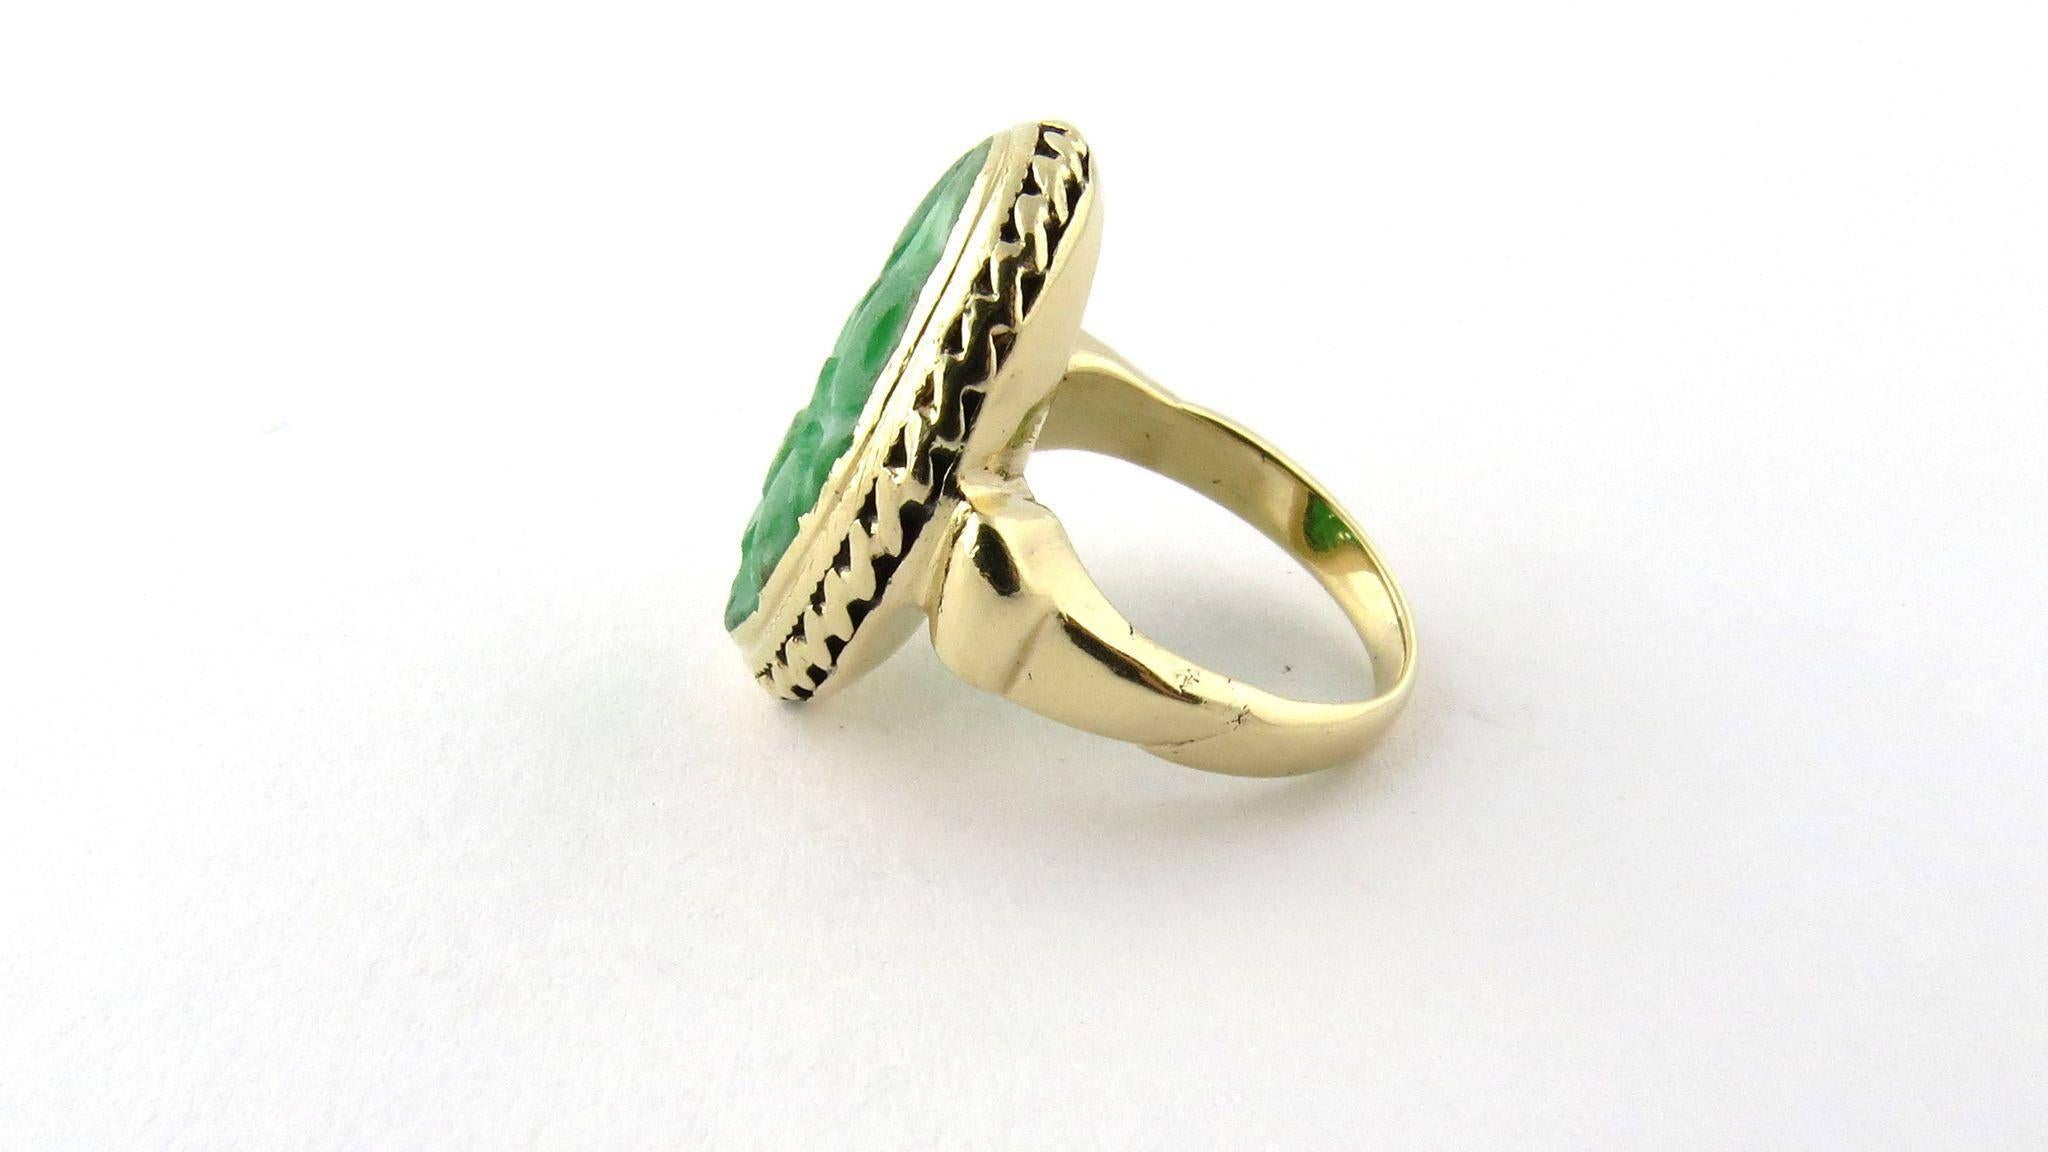 Intricately carved vintage bezel set oval jade ring set in 14K yellow gold. 

Size 3 1/2 16mm x 20mm stone setting. 2mm shank. 

Marked 14K. Weighs 6.4 g, 4.10 dwt. 

Excellent vintage pre-owned condition. Has been professionally polished. 

Item